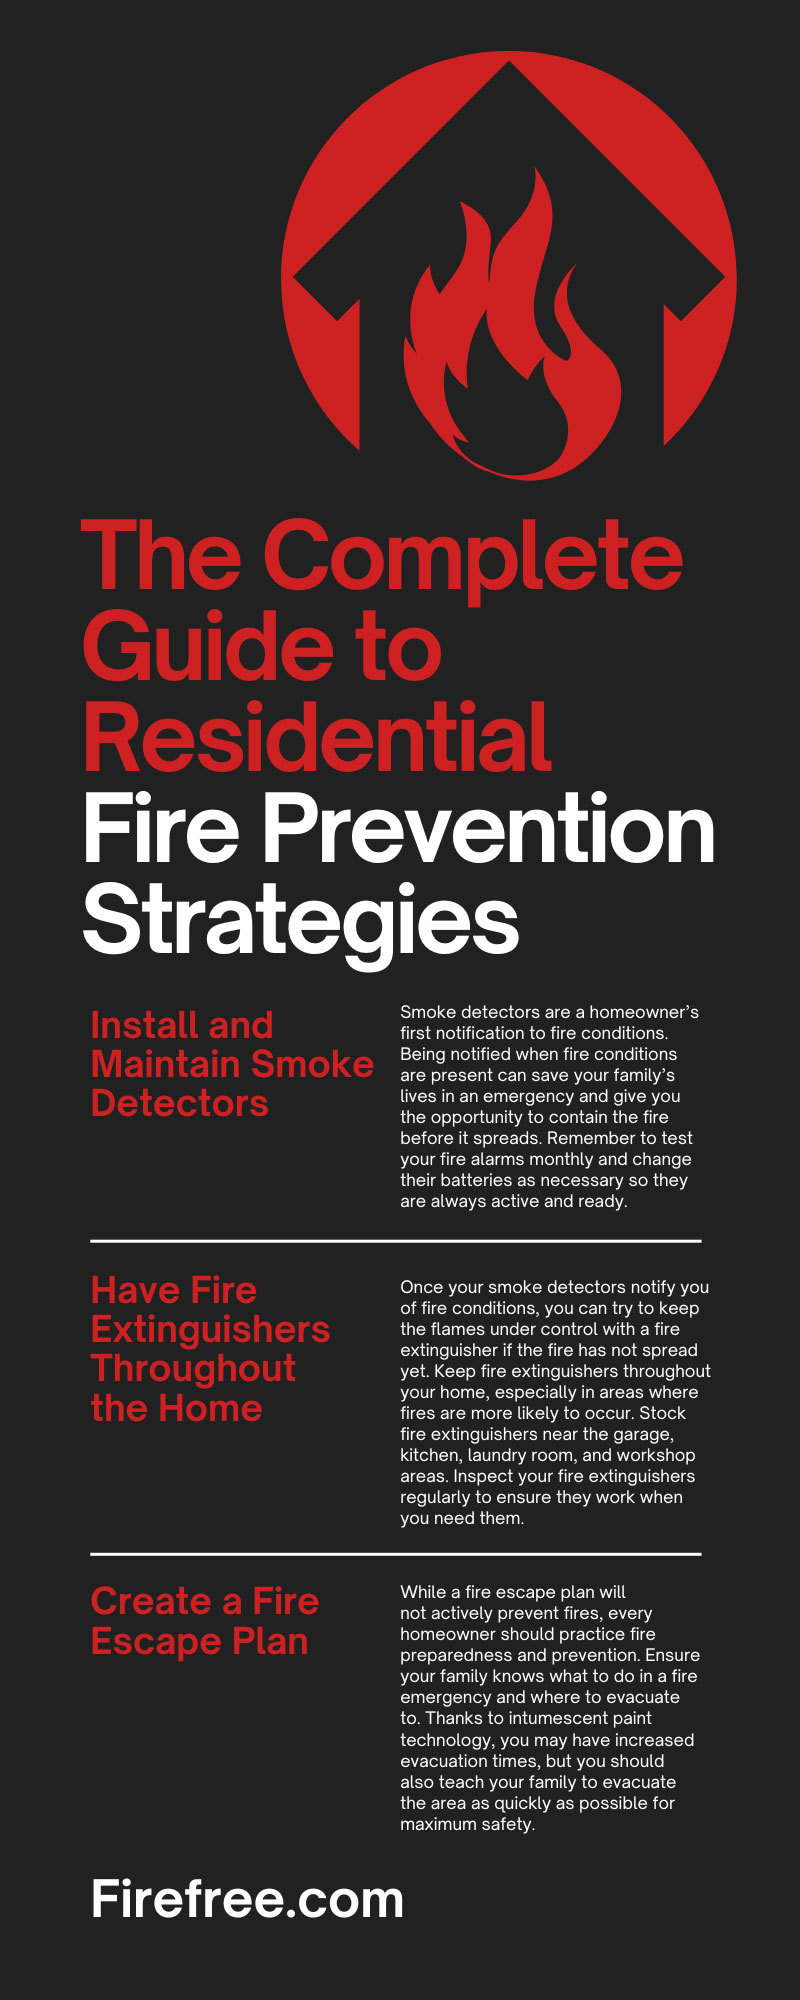 The Complete Guide to Residential Fire Prevention Strategies